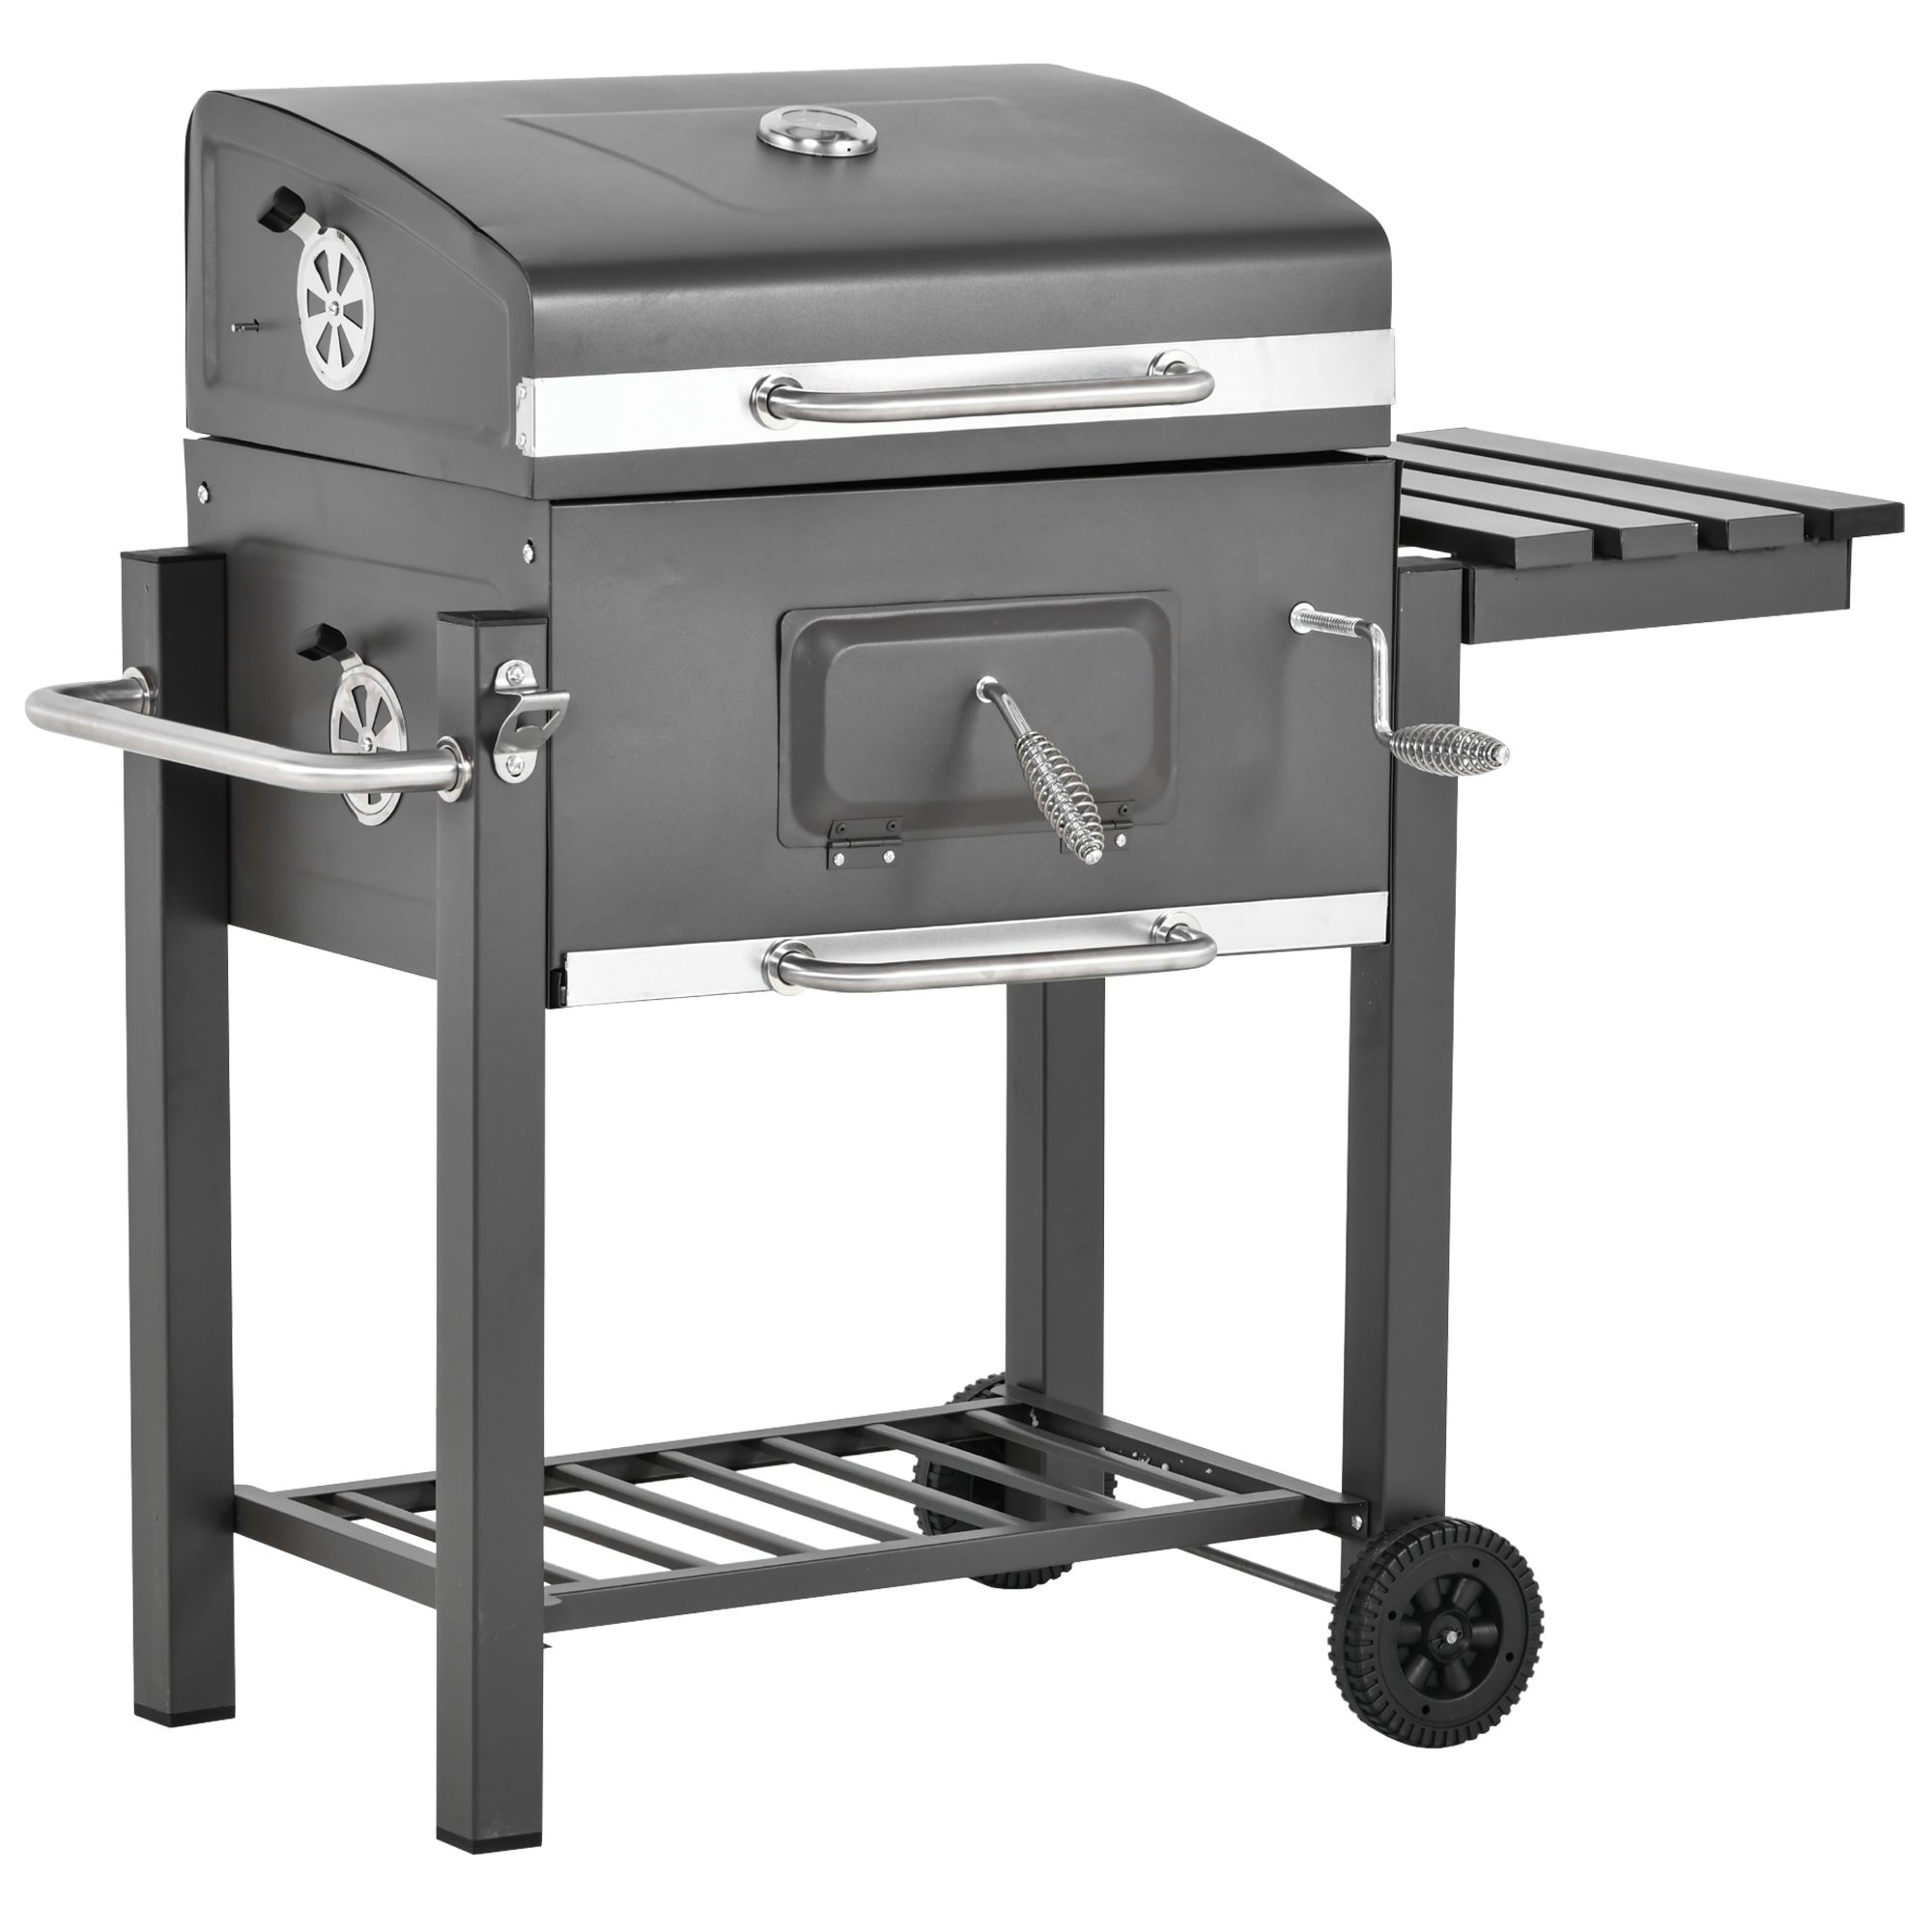 Outsunny Portable Charcoal Grill